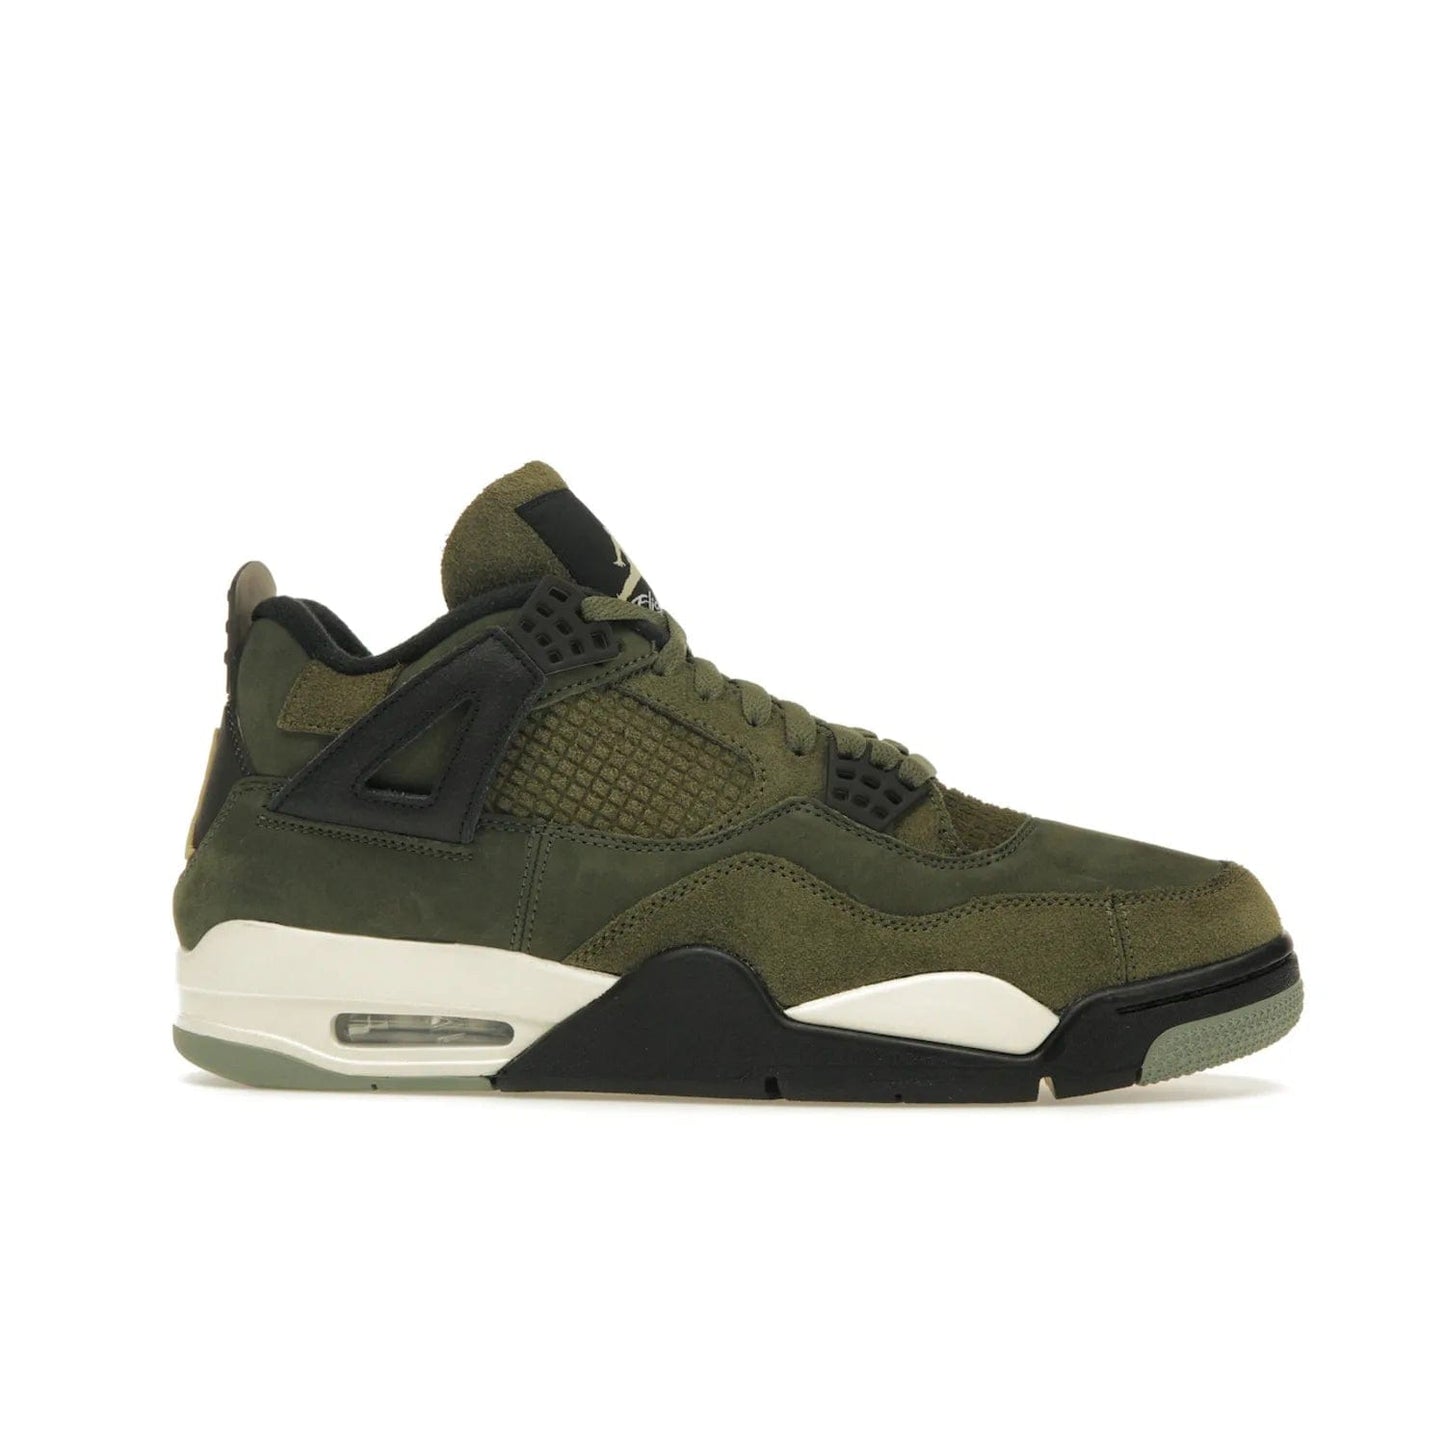 Jordan 4 Retro SE Craft Medium Olive - Image 2 - Only at www.BallersClubKickz.com - Grab the Jordan 4 Retro SE Crafts for a unique style. Combines Medium Olive, Pale Vanilla, Khaki, Black and Sail, with same classic shape, cushioning, and rubber outsole. Available on November 18th!